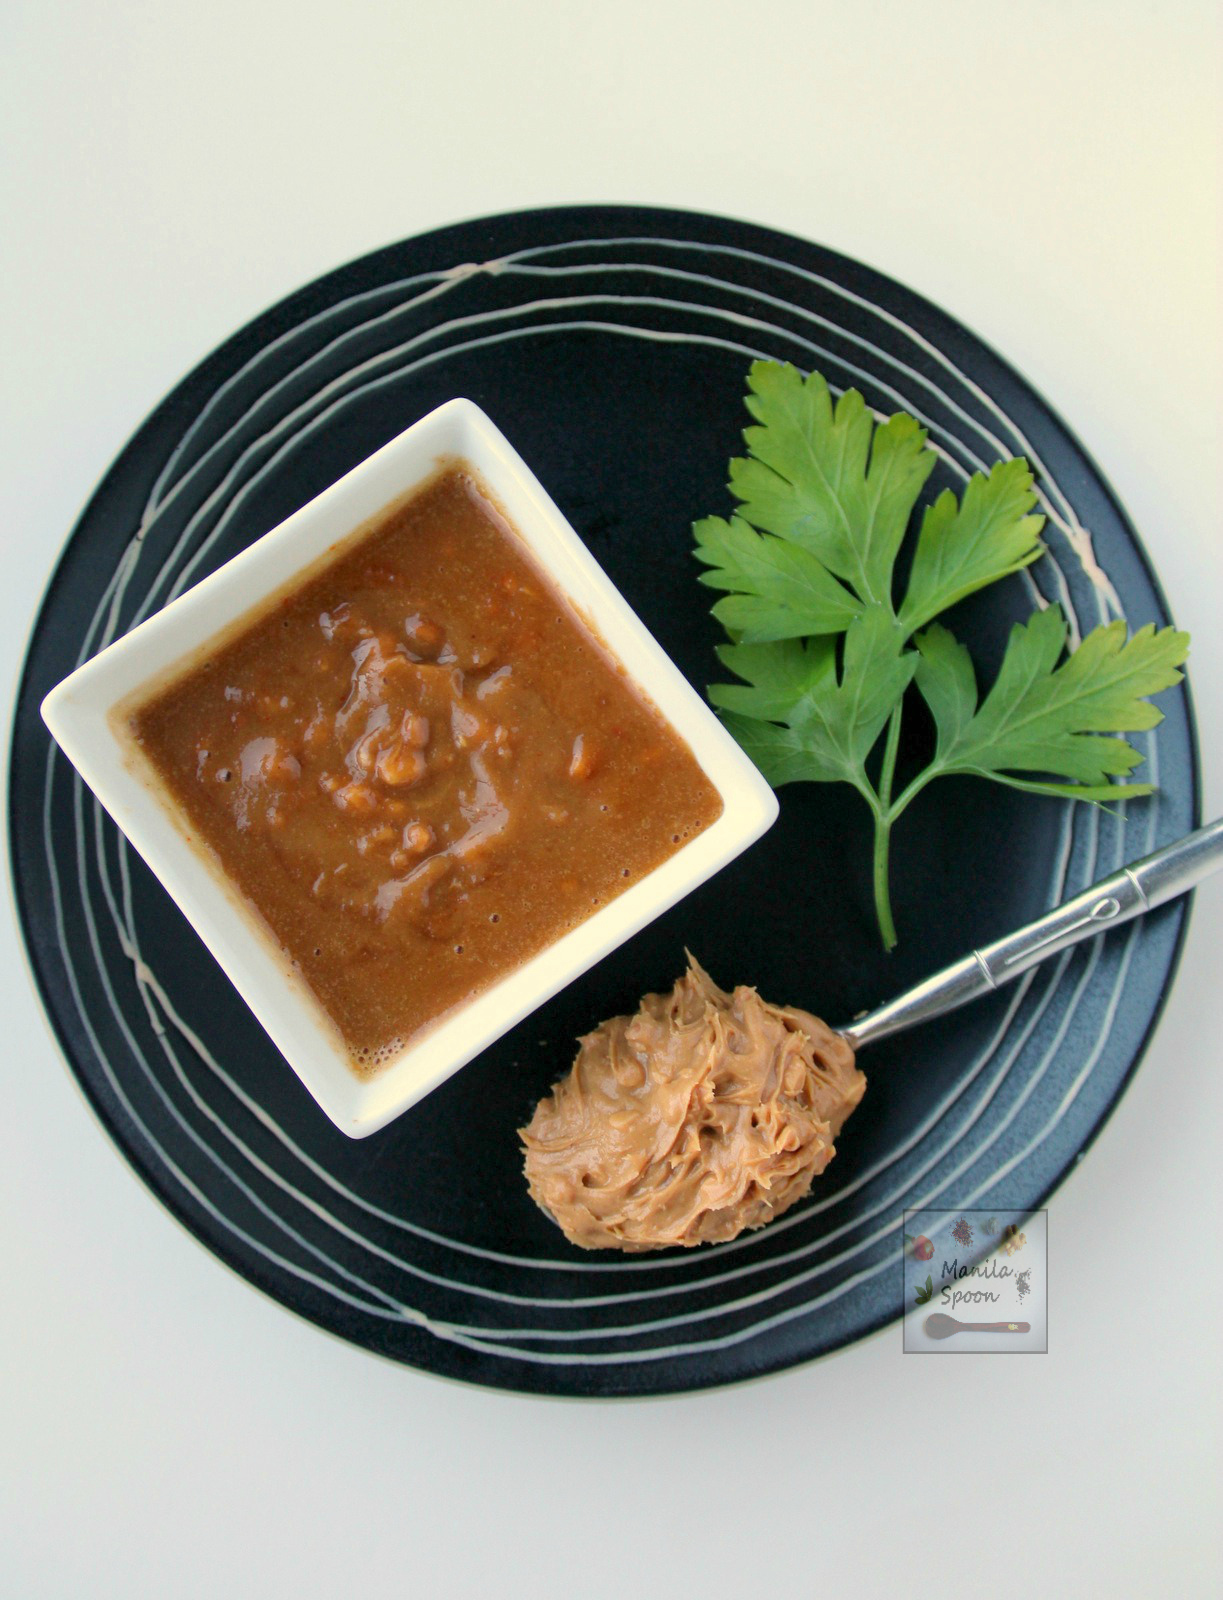 Use smooth or crunchy peanut butter to make this easy and tasty Peanut (Satay) Sauce. Serve this as sauce or dip for grilled meat or toss with some noodles for an Asian-inspired dish. | manilaspoon.com